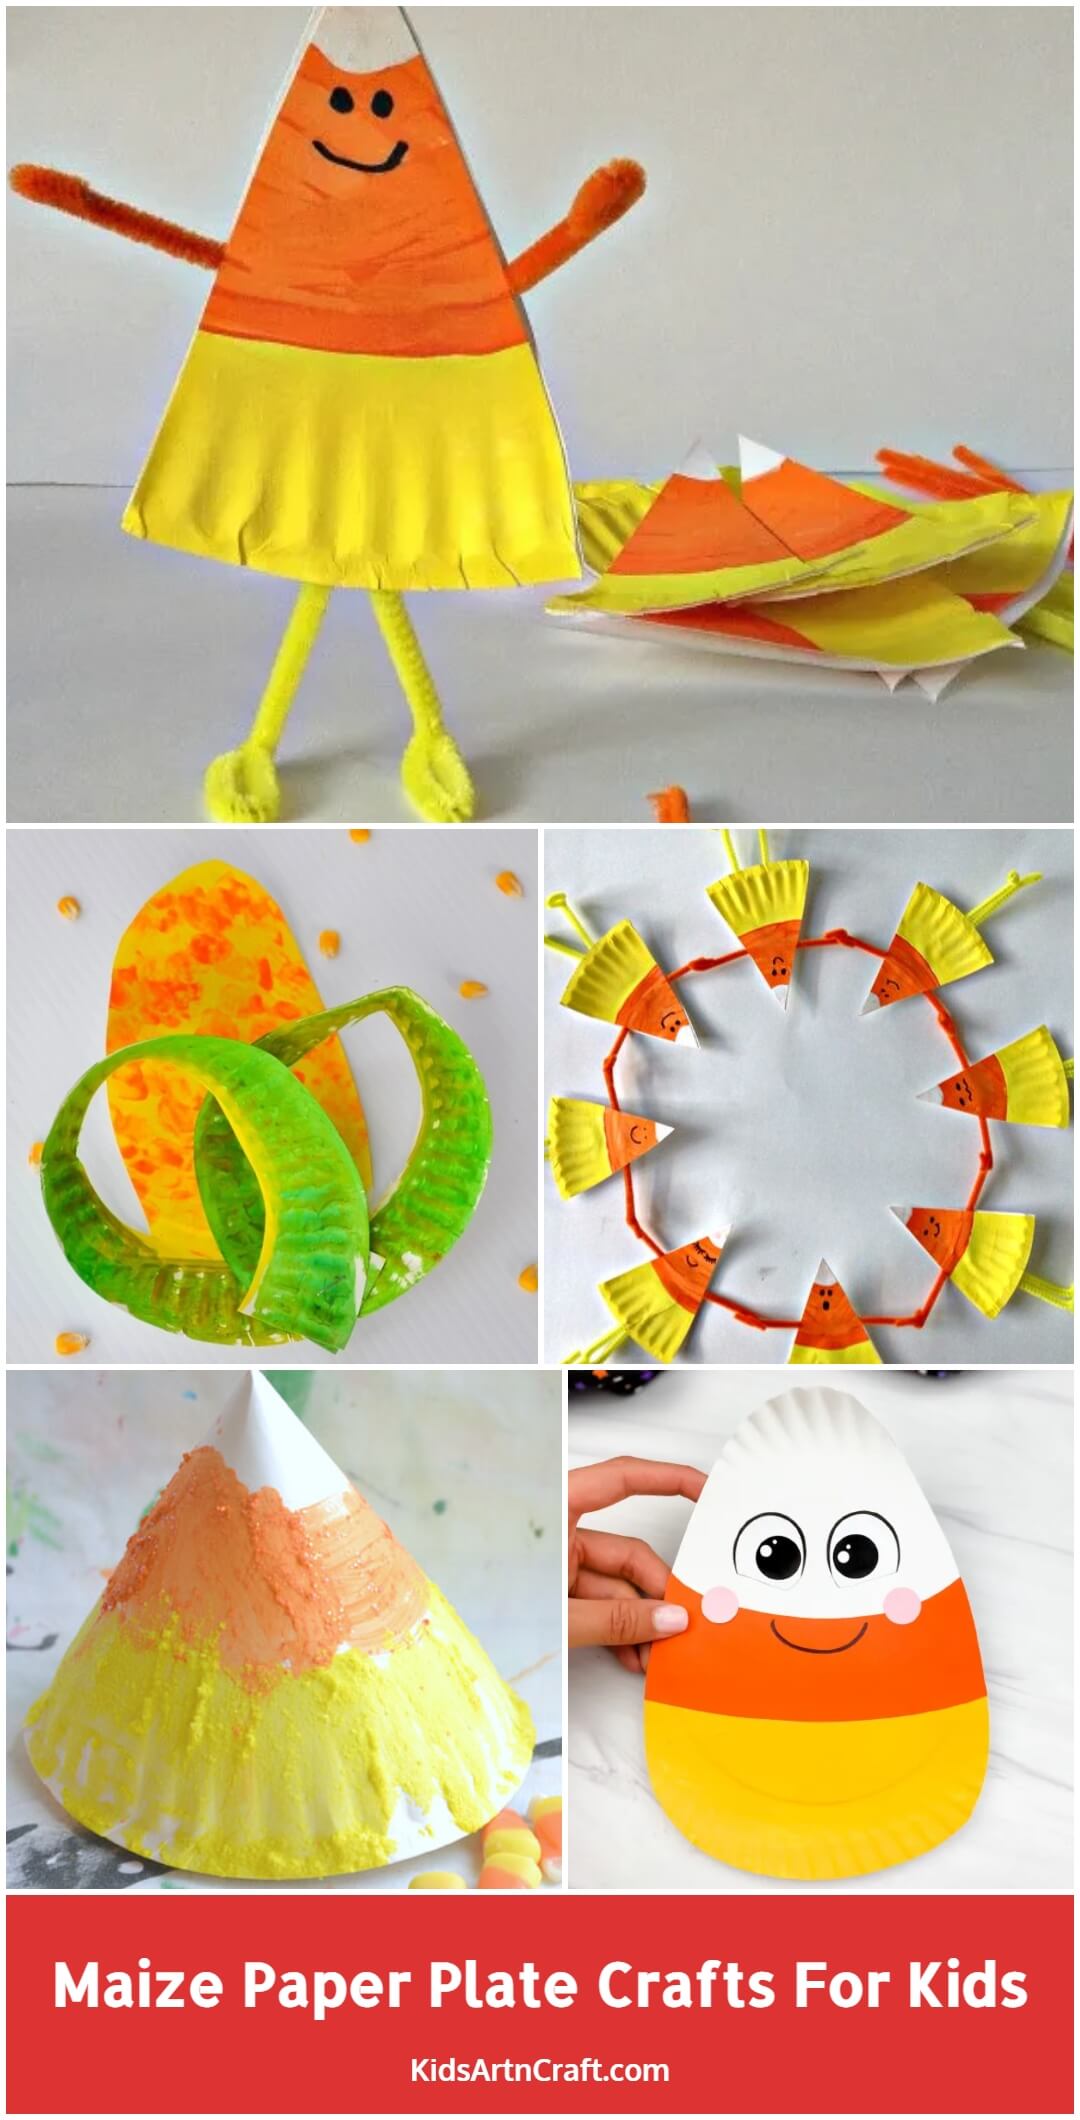 Maize Paper Plate Crafts for Kids